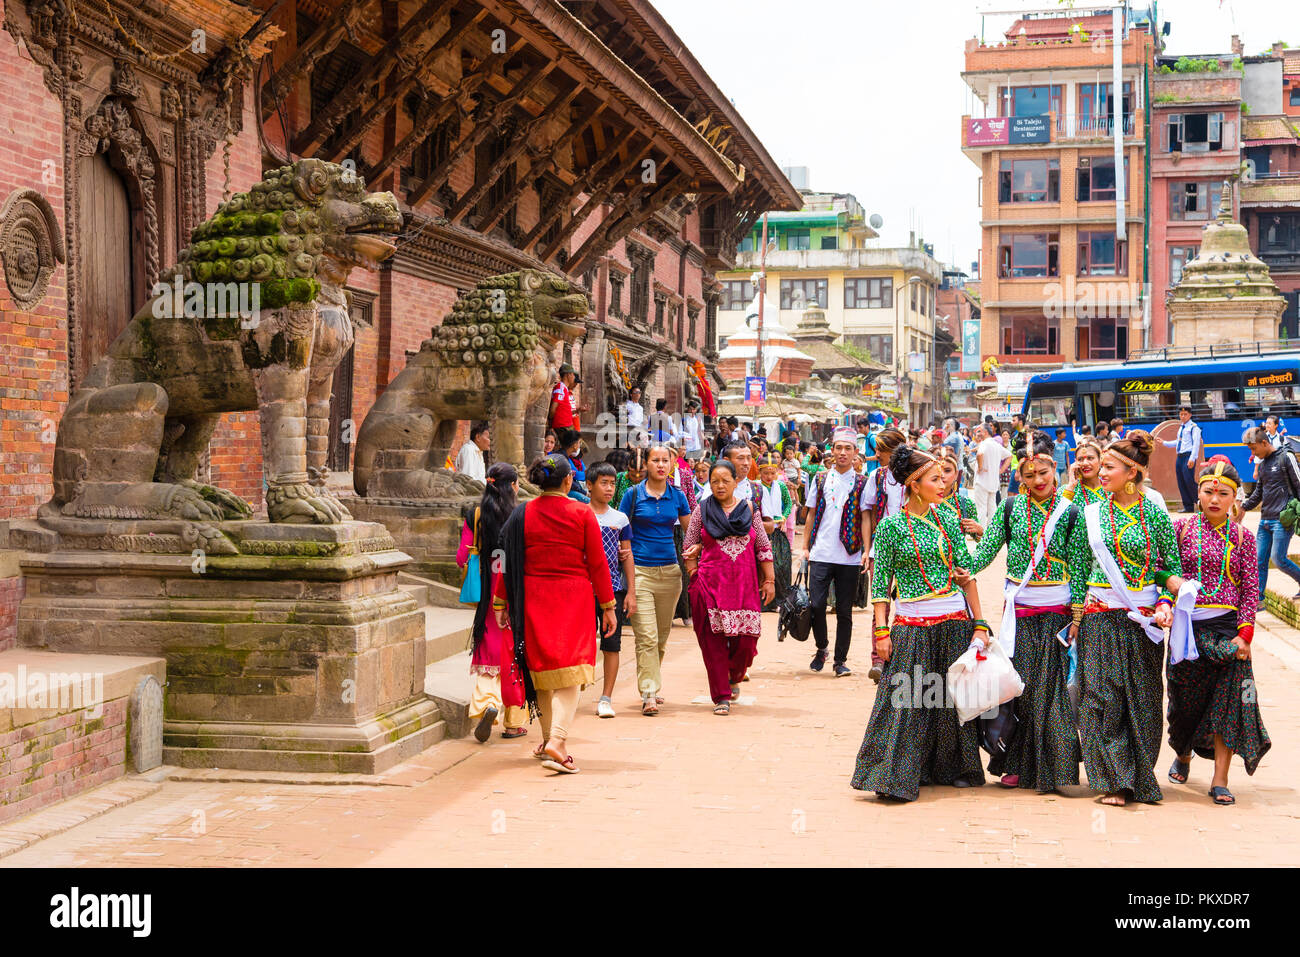 Patan, Lalitpur, Nepal - July 17, 2018 : Group of dancers wearing traditional costumes in Patan Durbar Square, UNESCO World Heritage Site Stock Photo